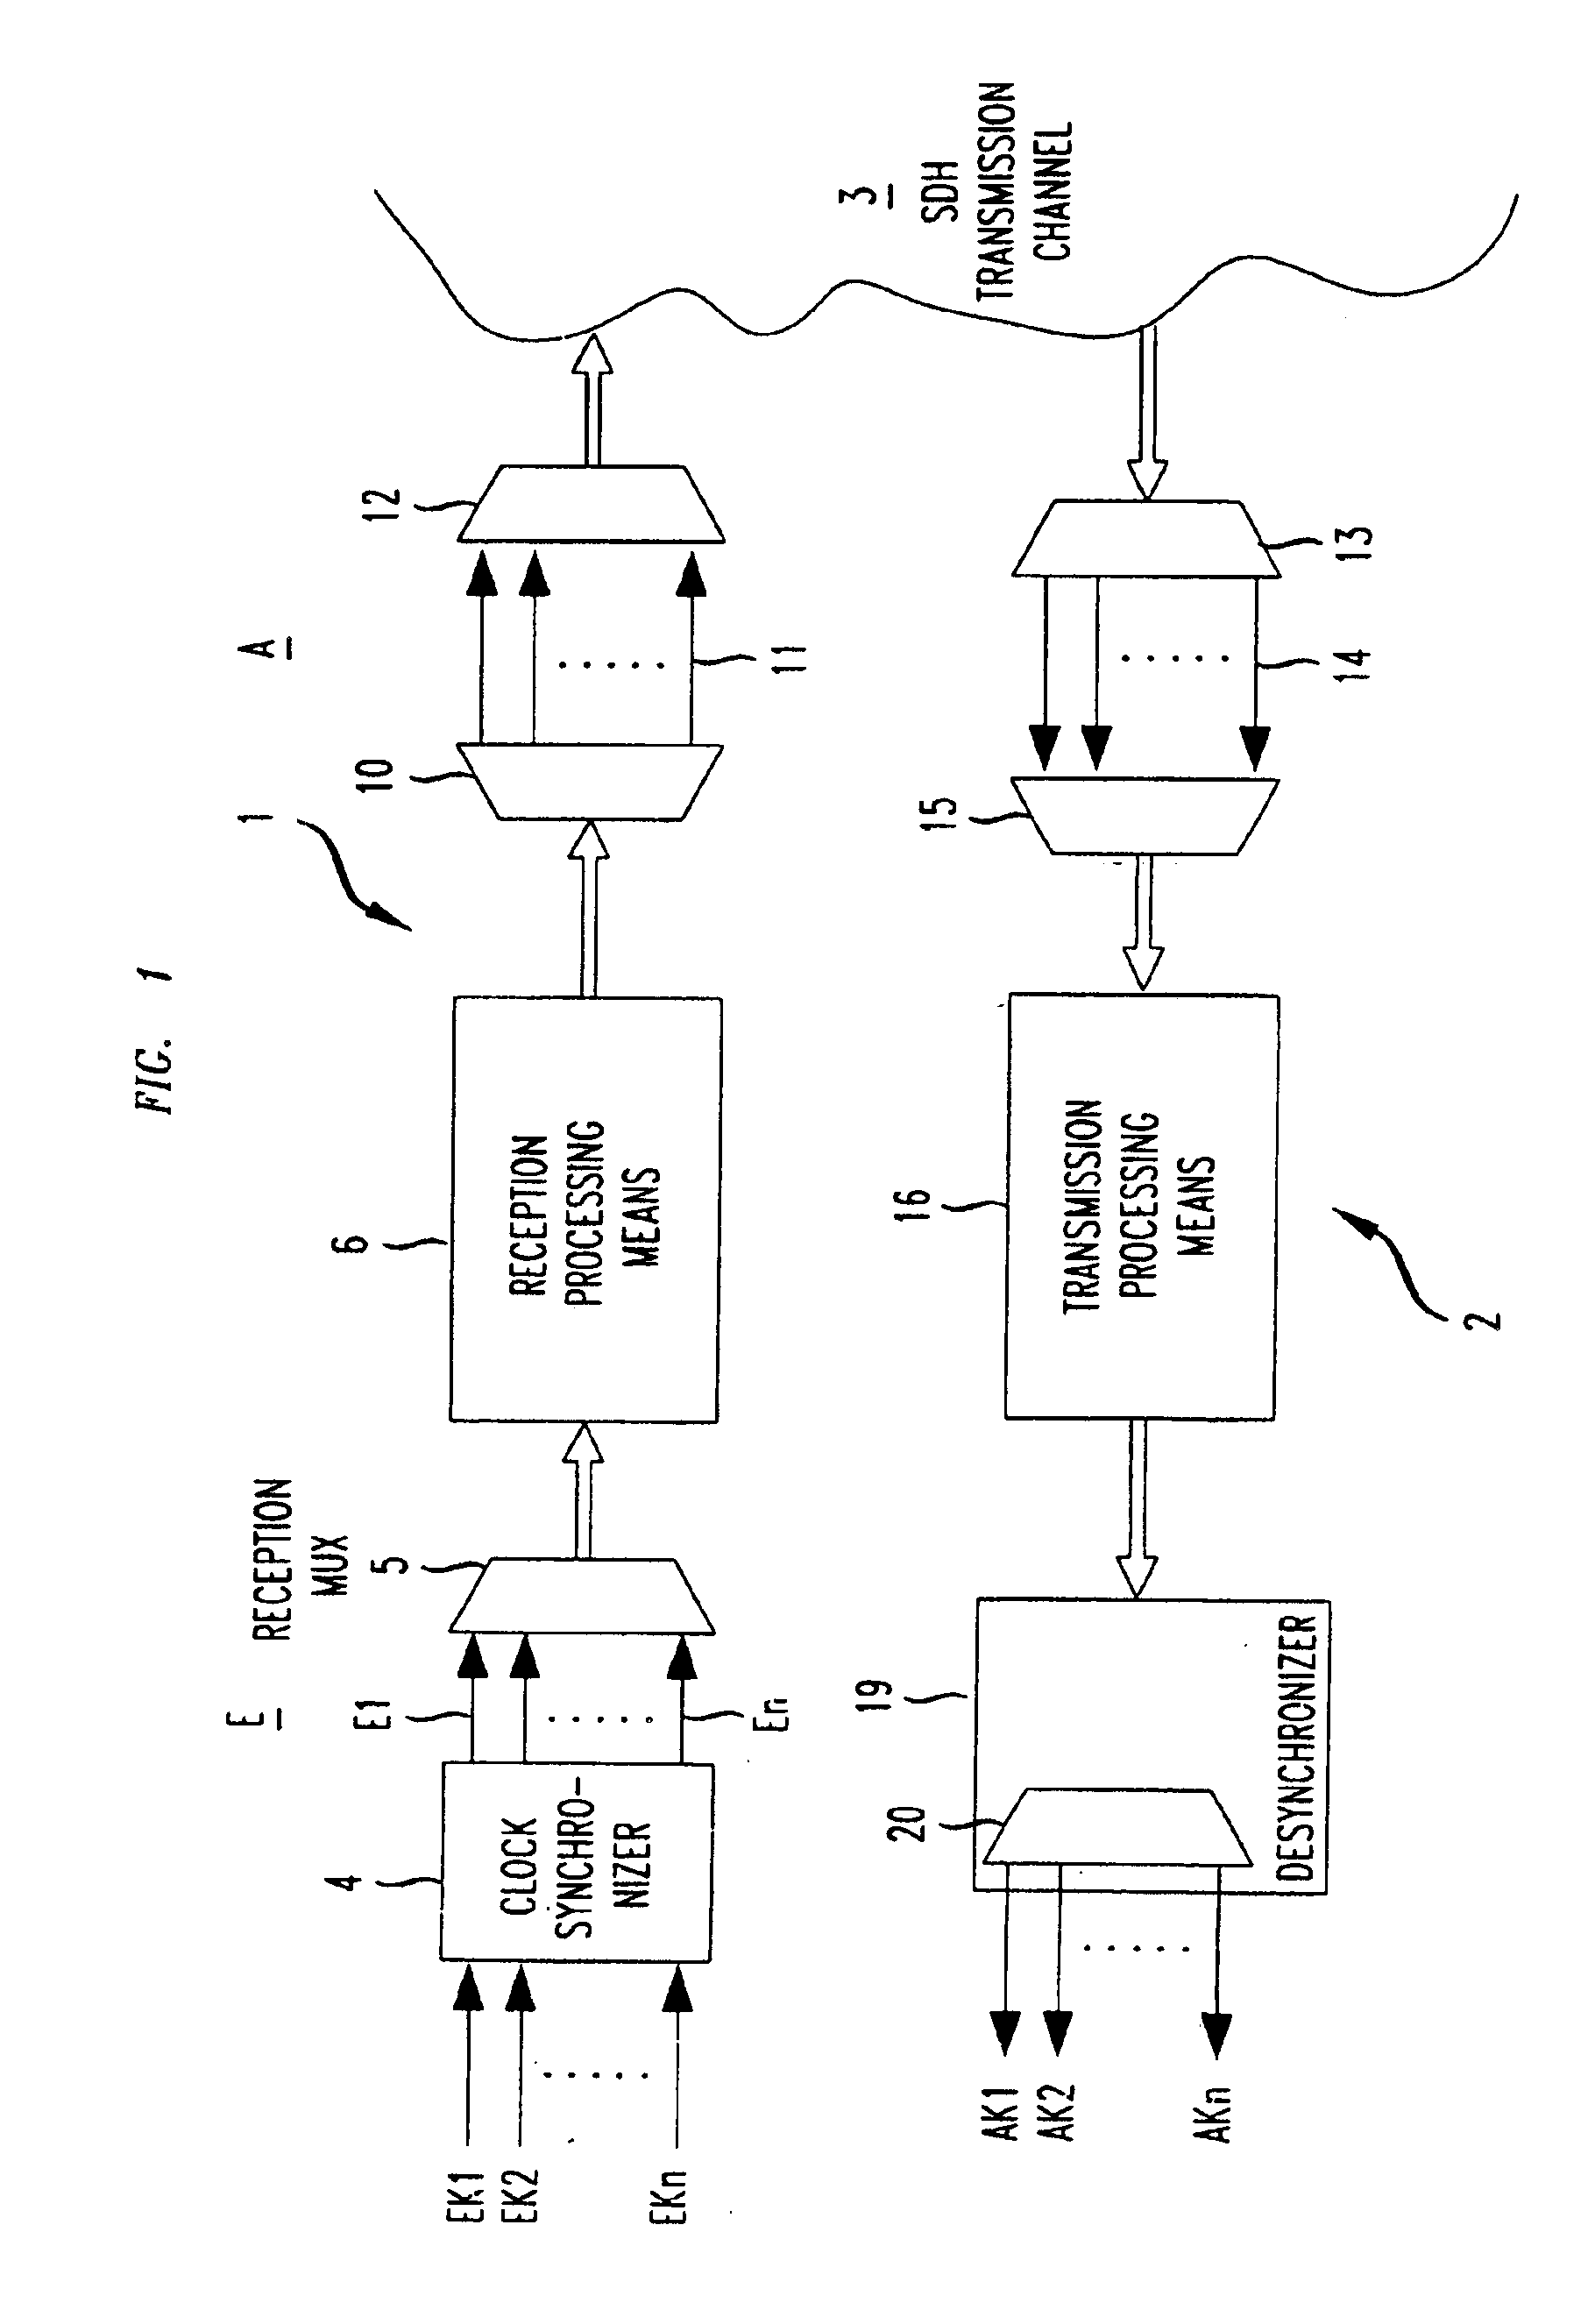 Circuit for transmitting plesiochronous signals in a SDH system